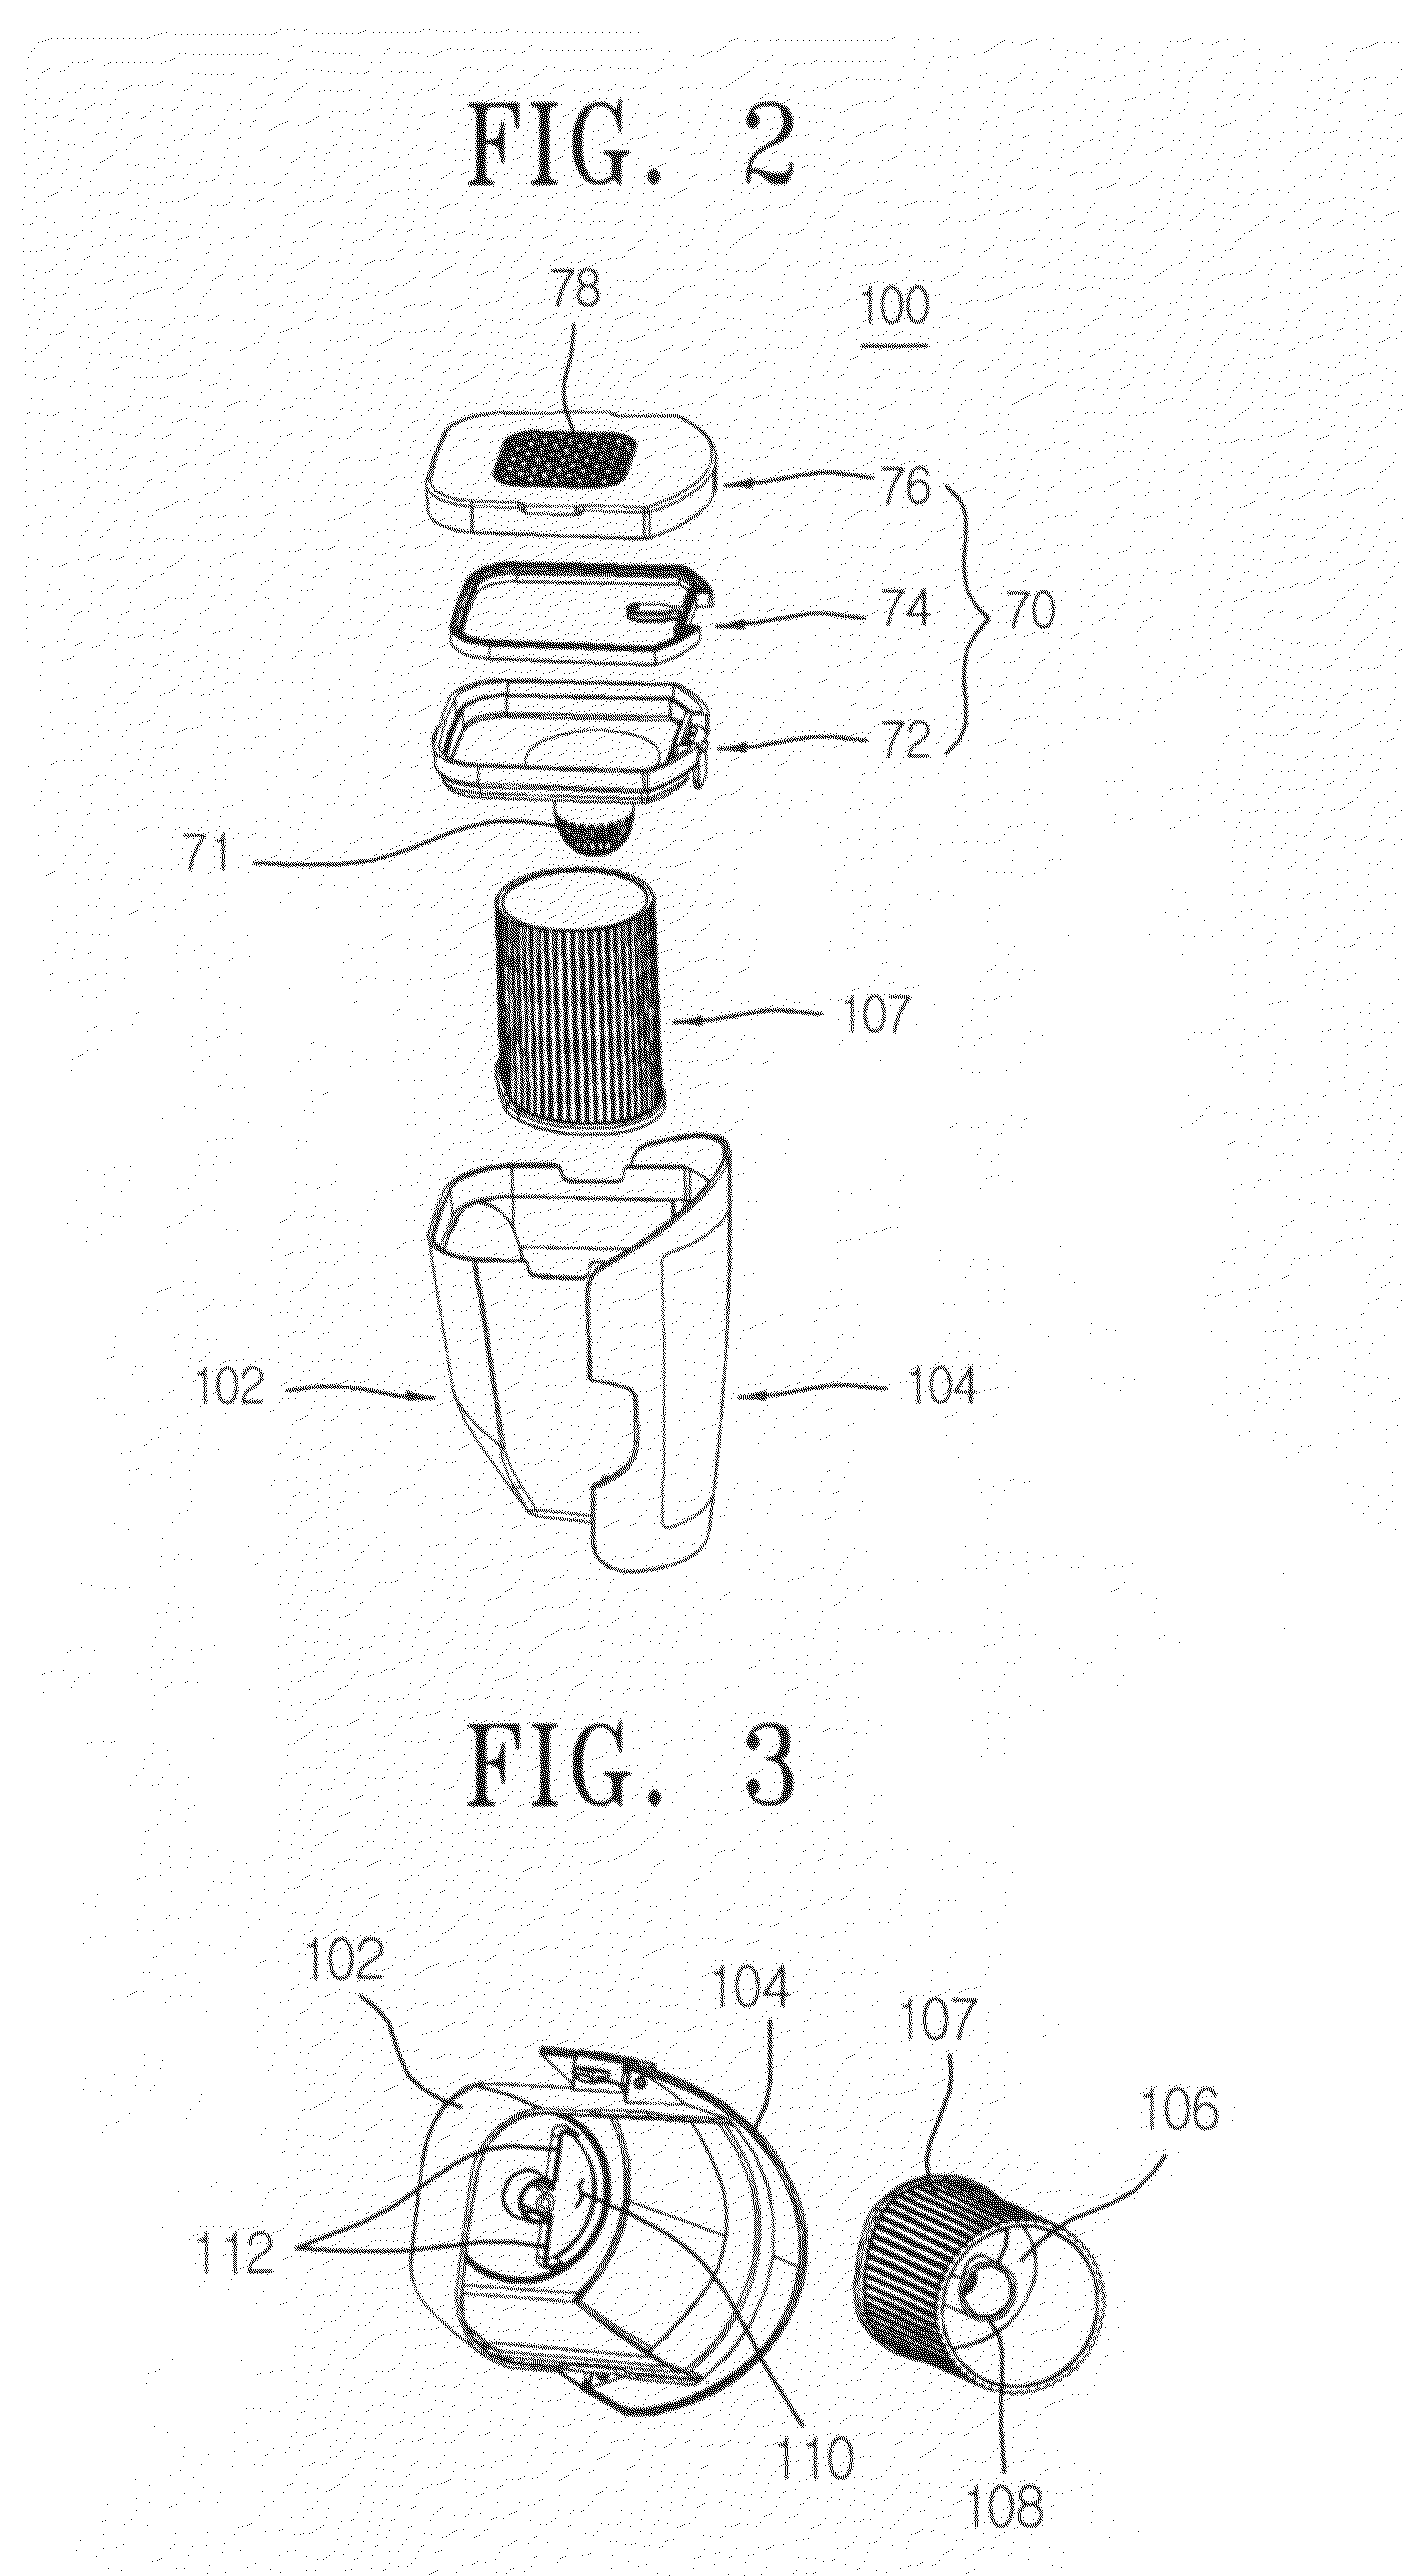 Cyclone dust collecting apparatus and hand-held cleaner having the same